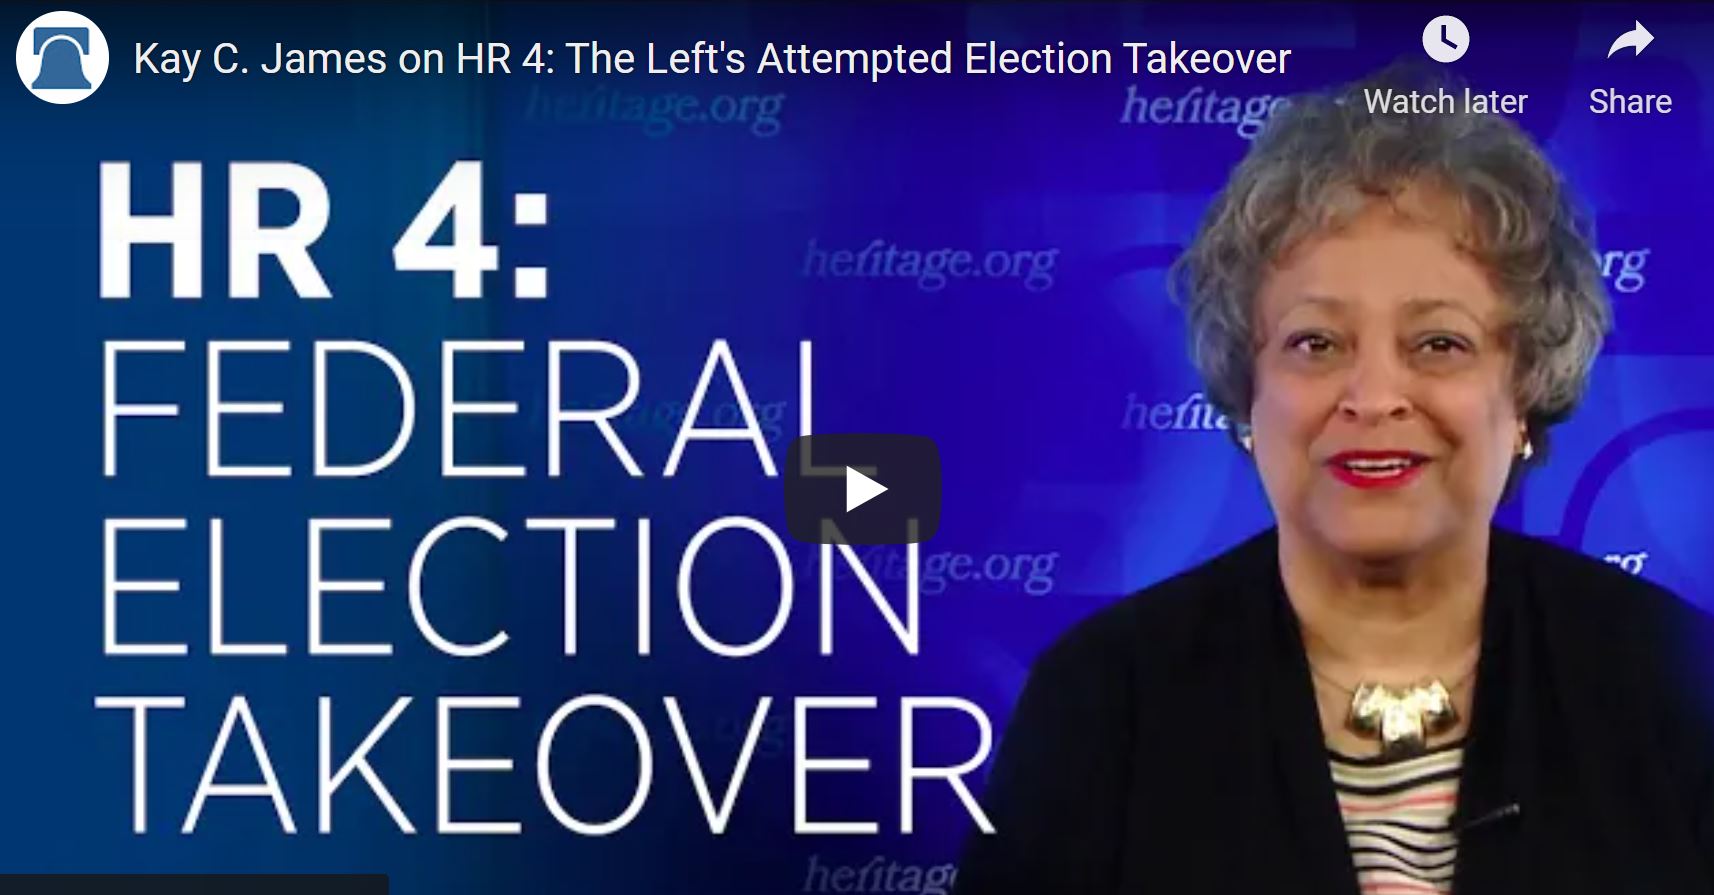 Kay C. James on HR 4: The Left's Attempted Election Takeover